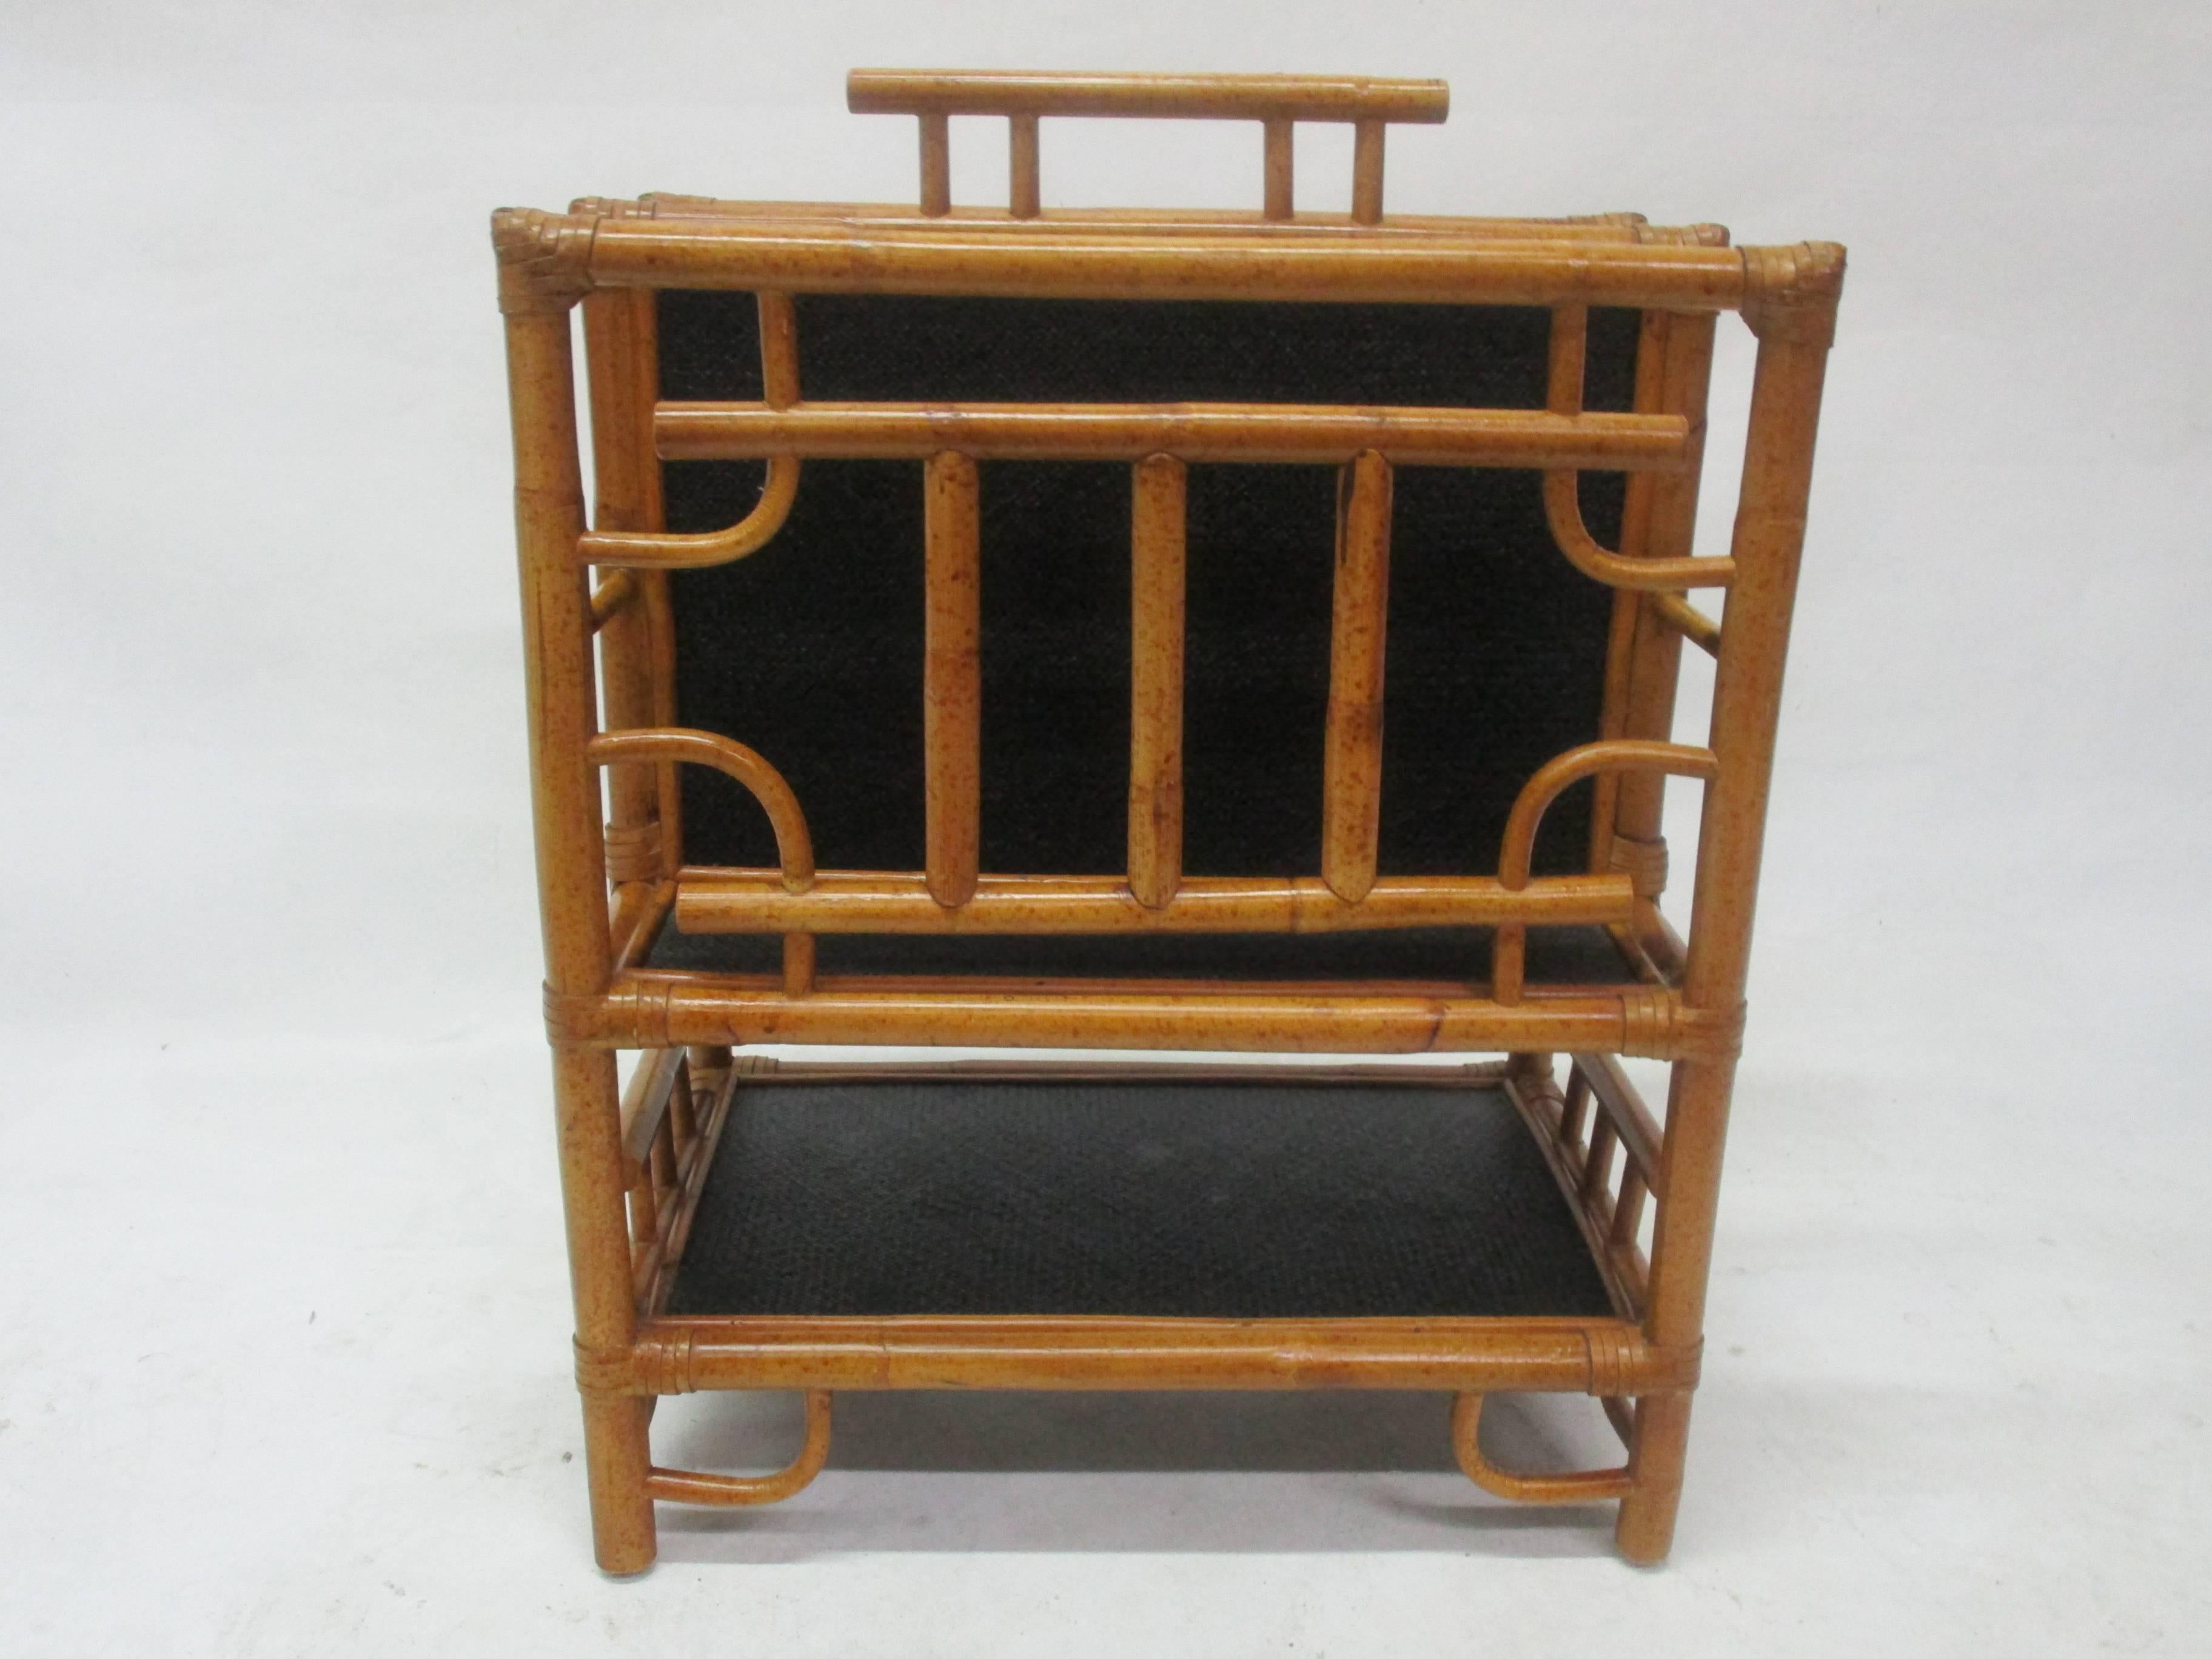 Large magazine rack made of bamboo and black stained rattan. The height has been measured without the handle which adds 2.25